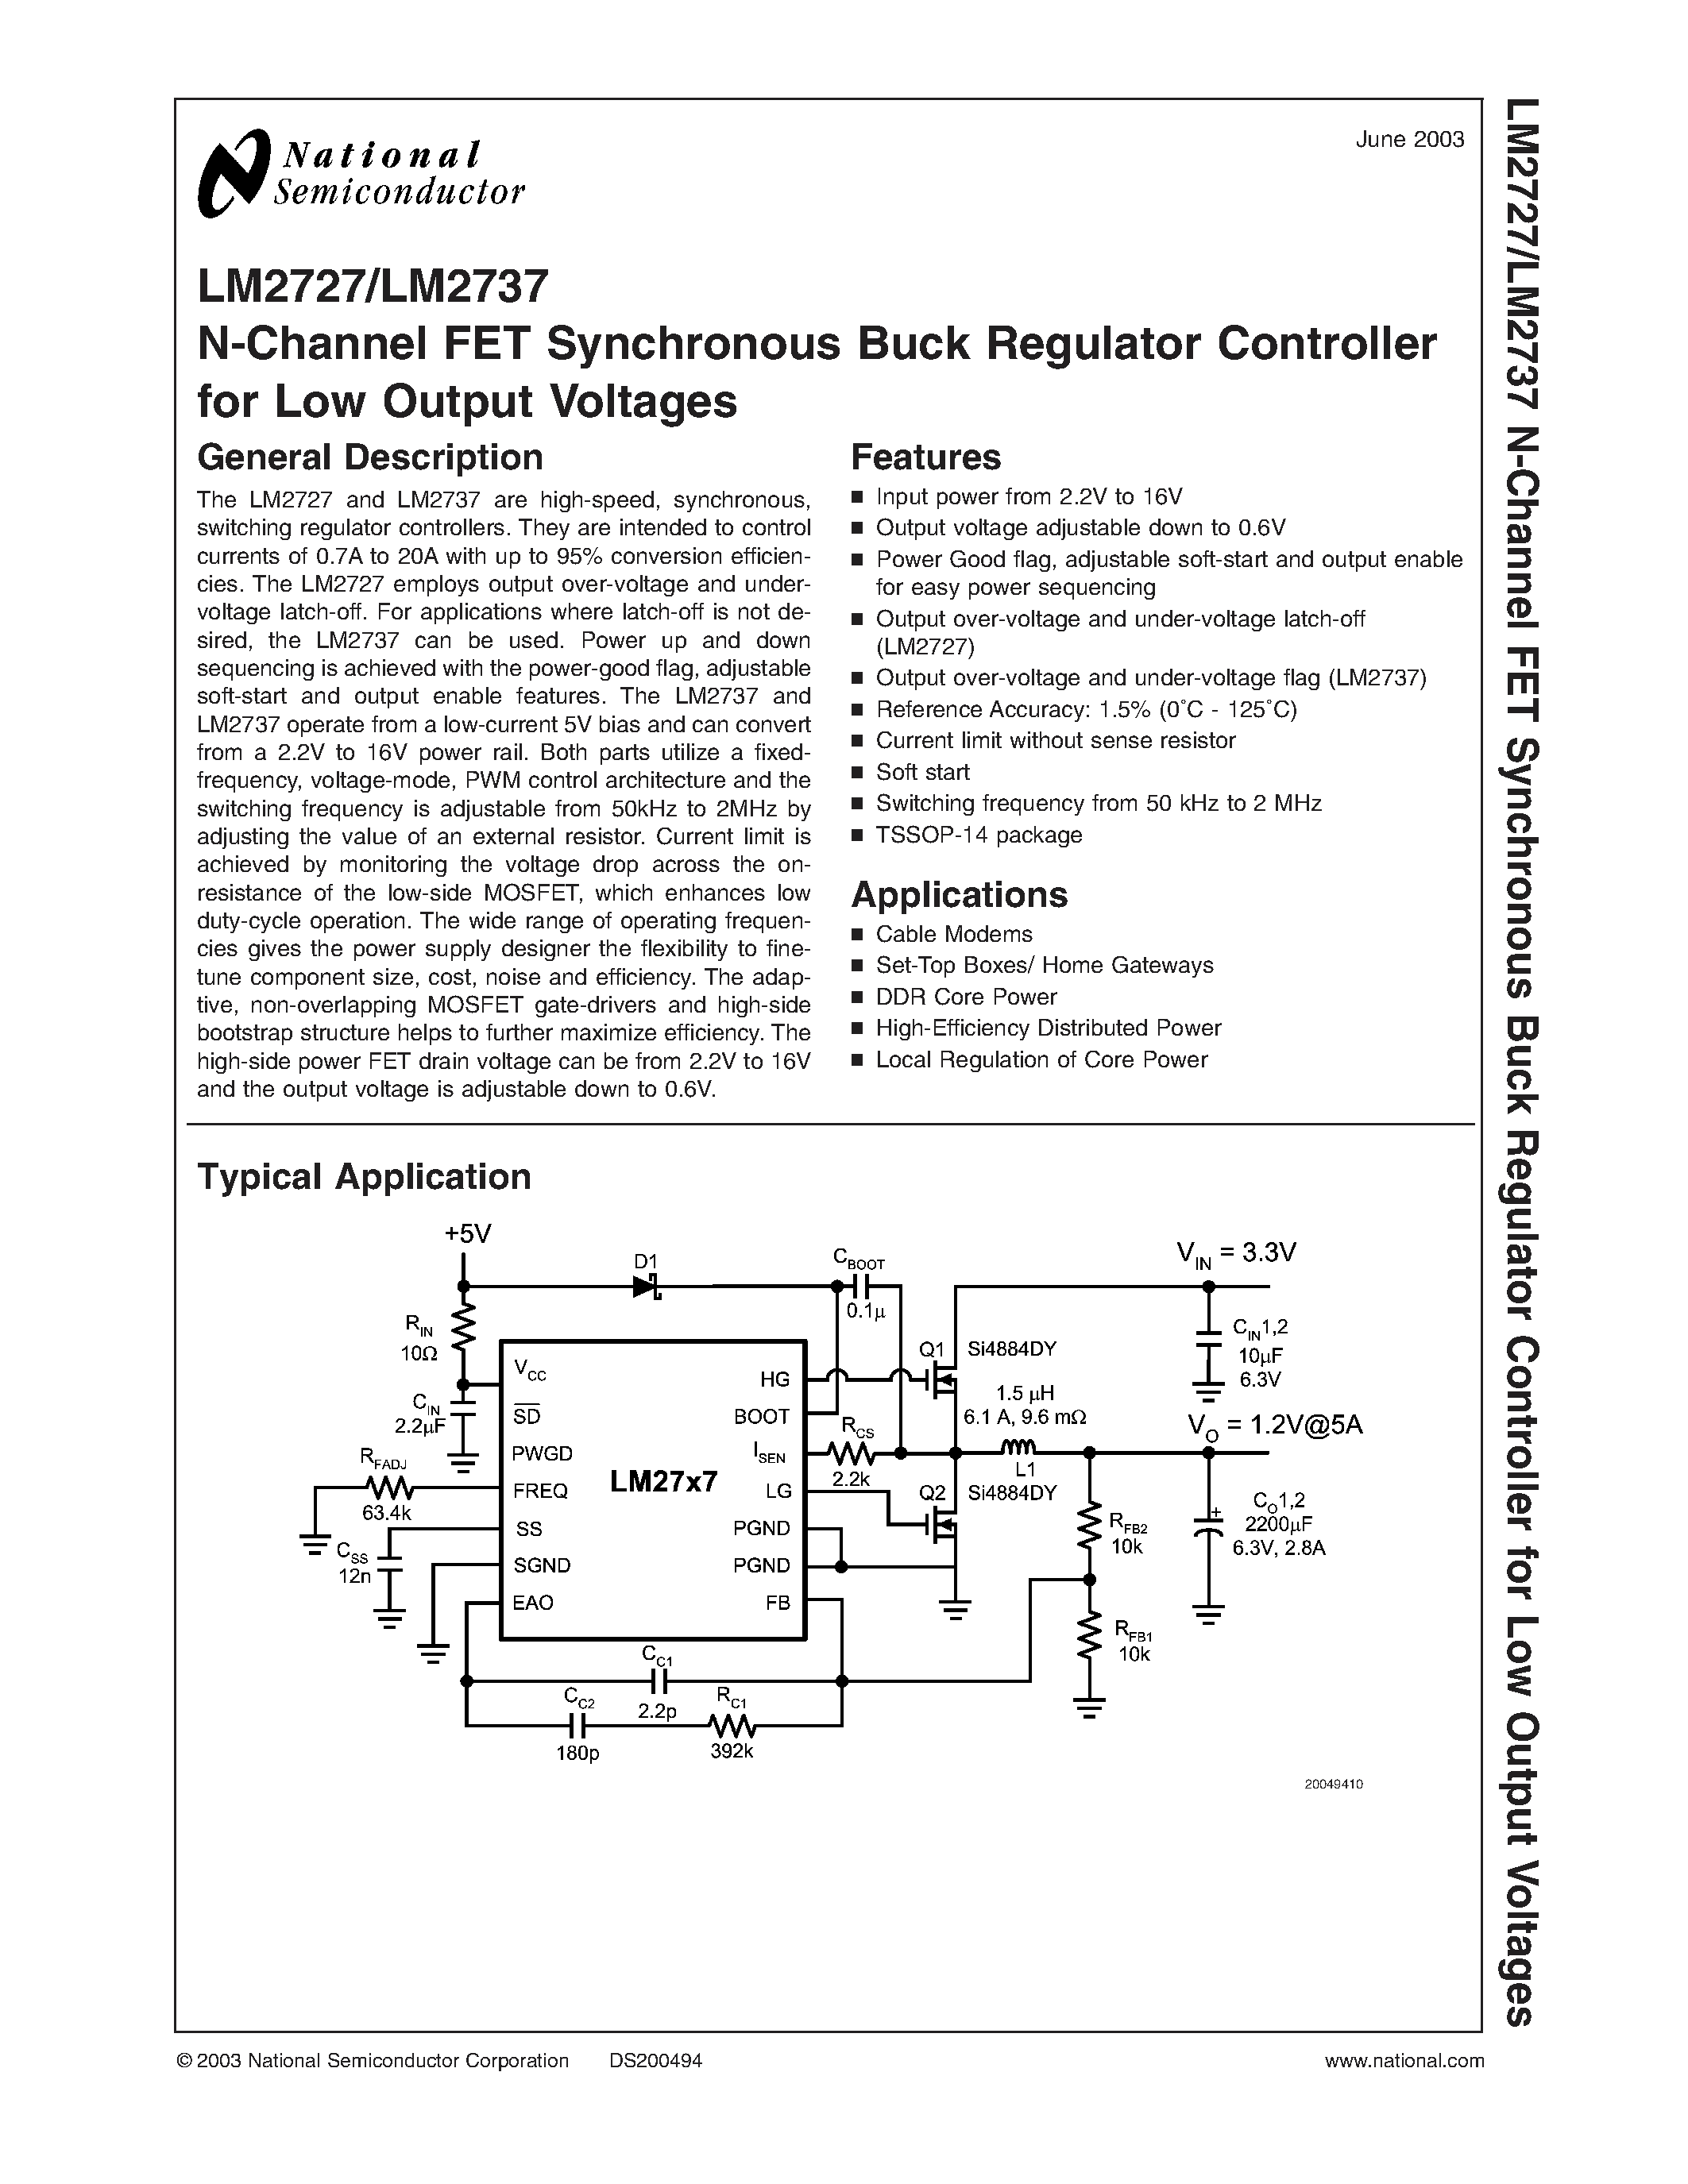 Даташит A220 - N-Channel FET Synchronous Buck Regulator Controller for Low Output Voltages страница 1